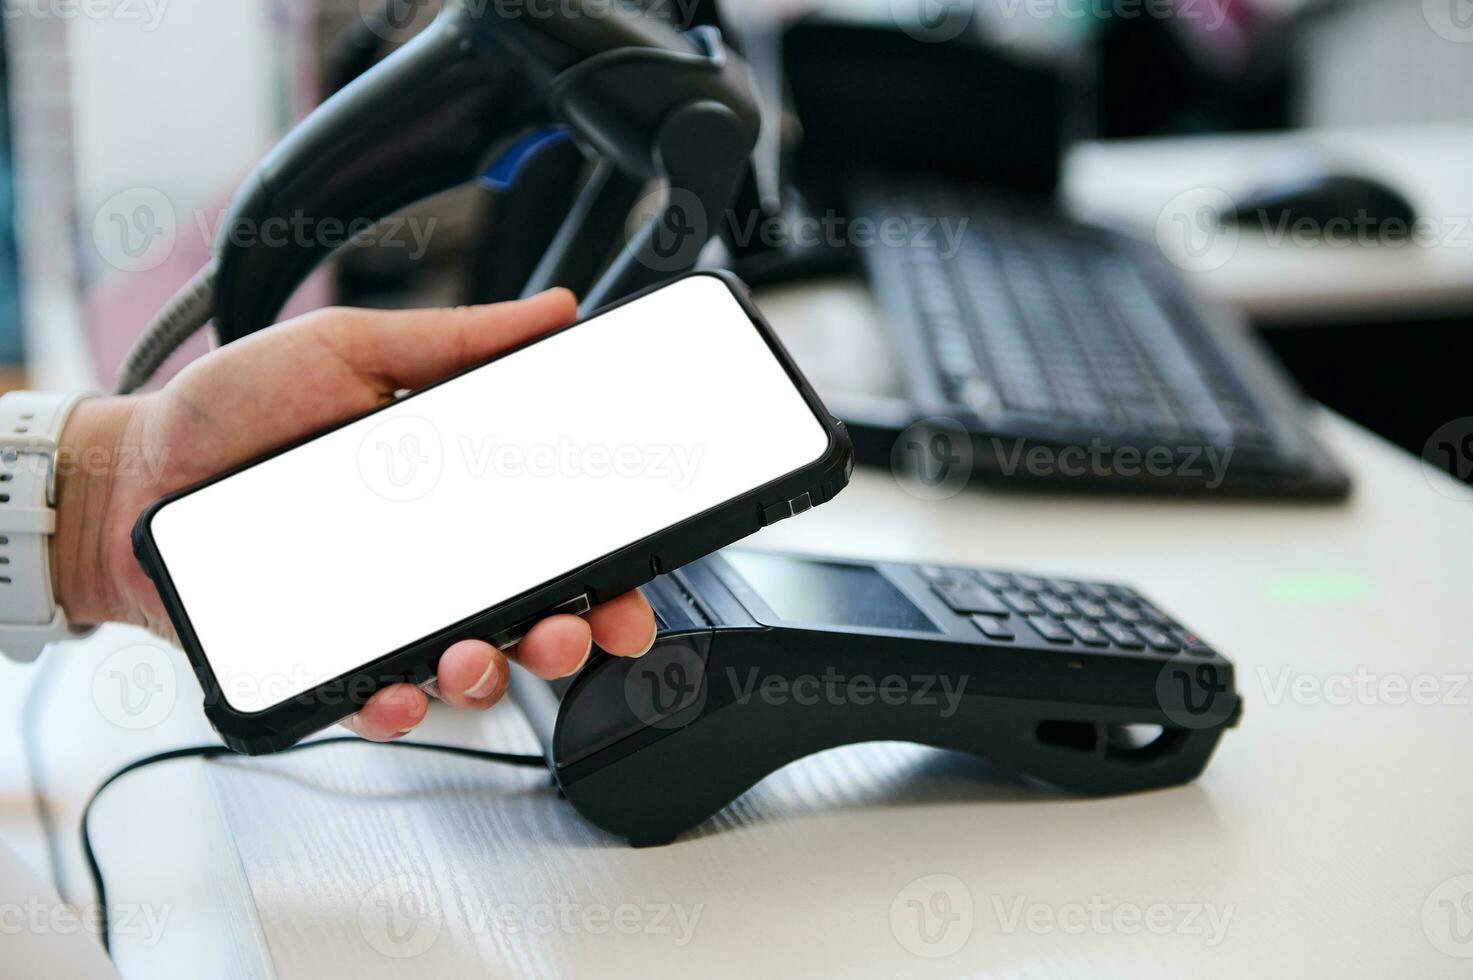 Close-up hand of customer holding smartphone with white mockup digital screen over a credit card reader, paying via NFC photo